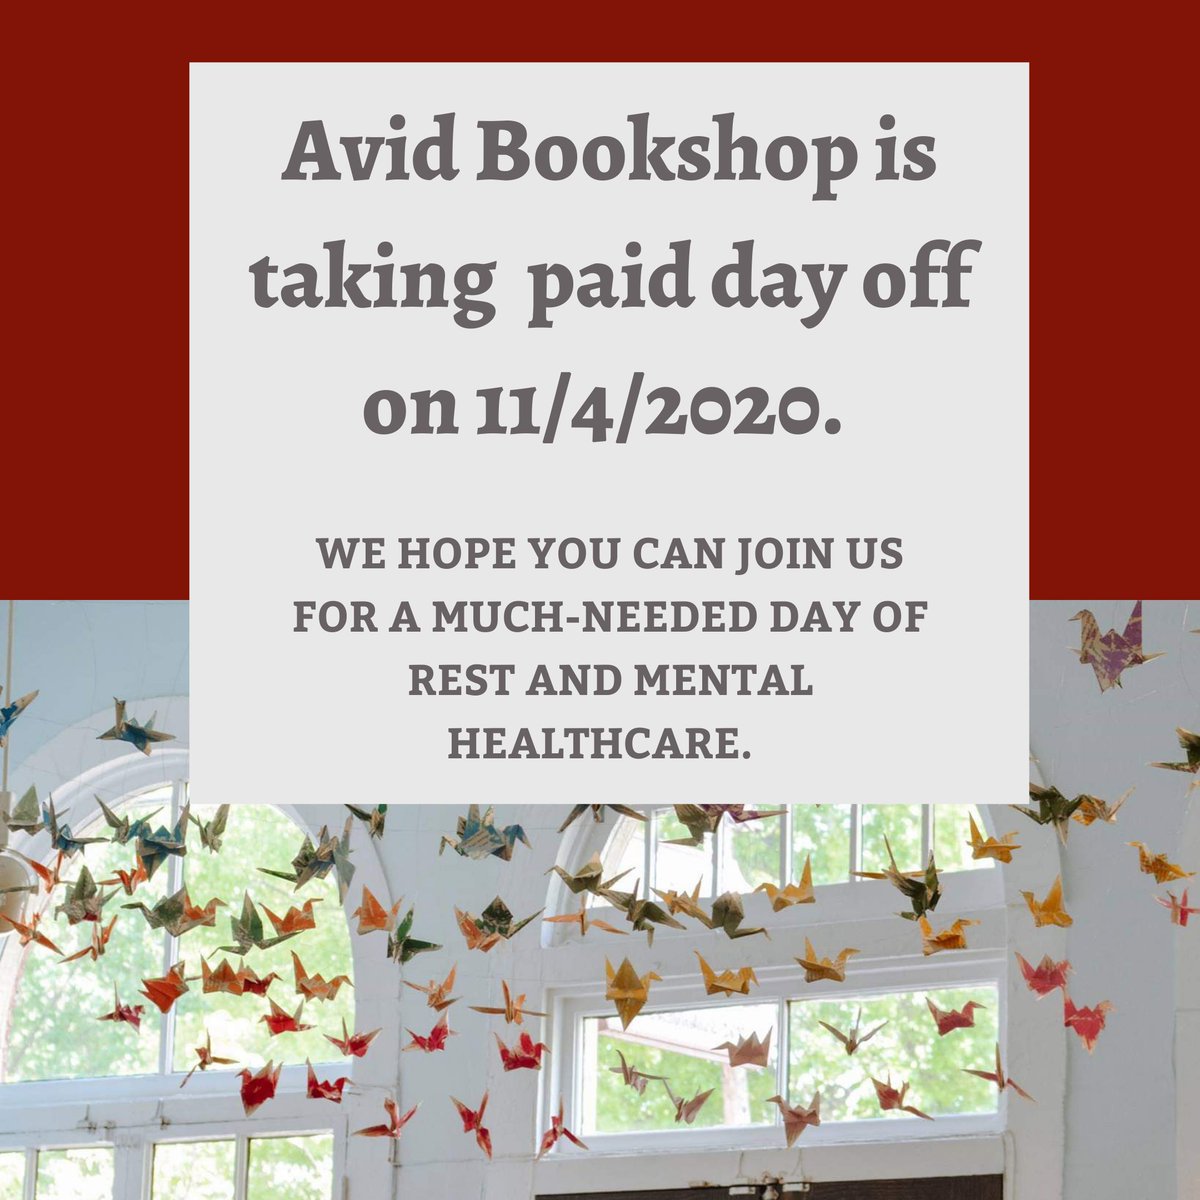 Avid Bookshop is taking a day off.Booksellers will be getting a paid day off on Wednesday, November 4th, 2020.Read more here:  https://www.avidbookshop.com/announcements 